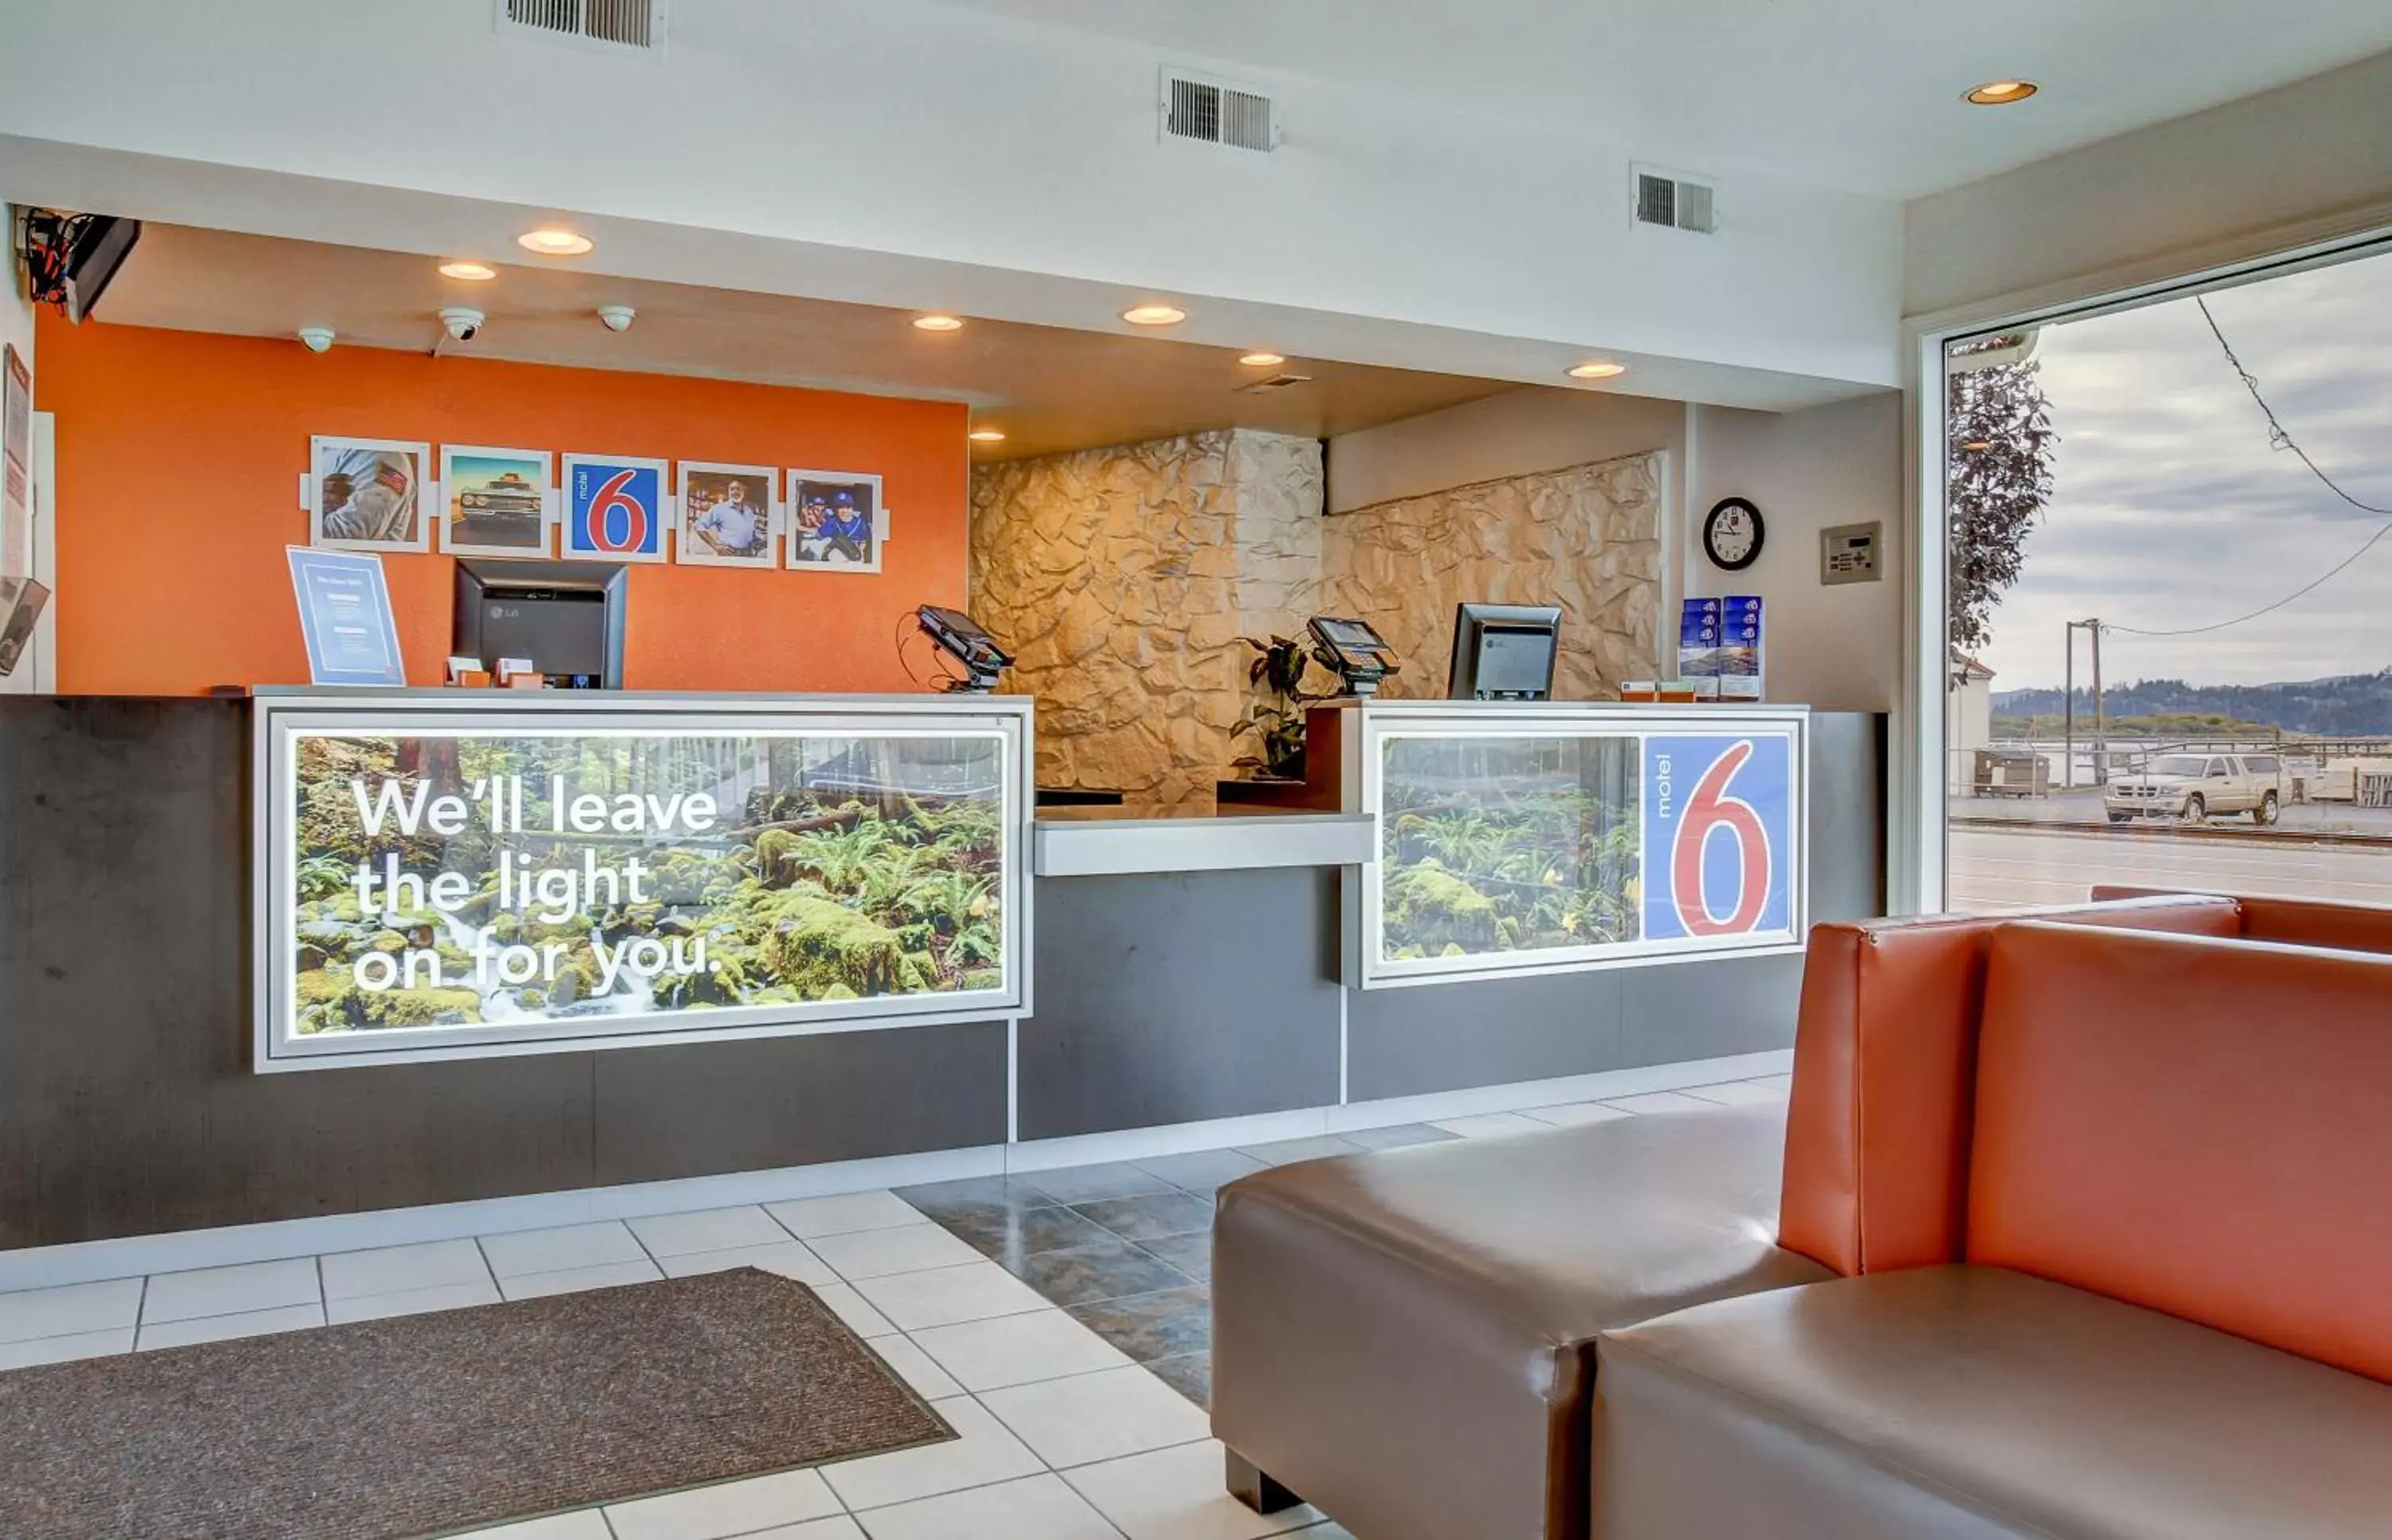 Lobby or reception in Motel 6-Coos Bay, OR